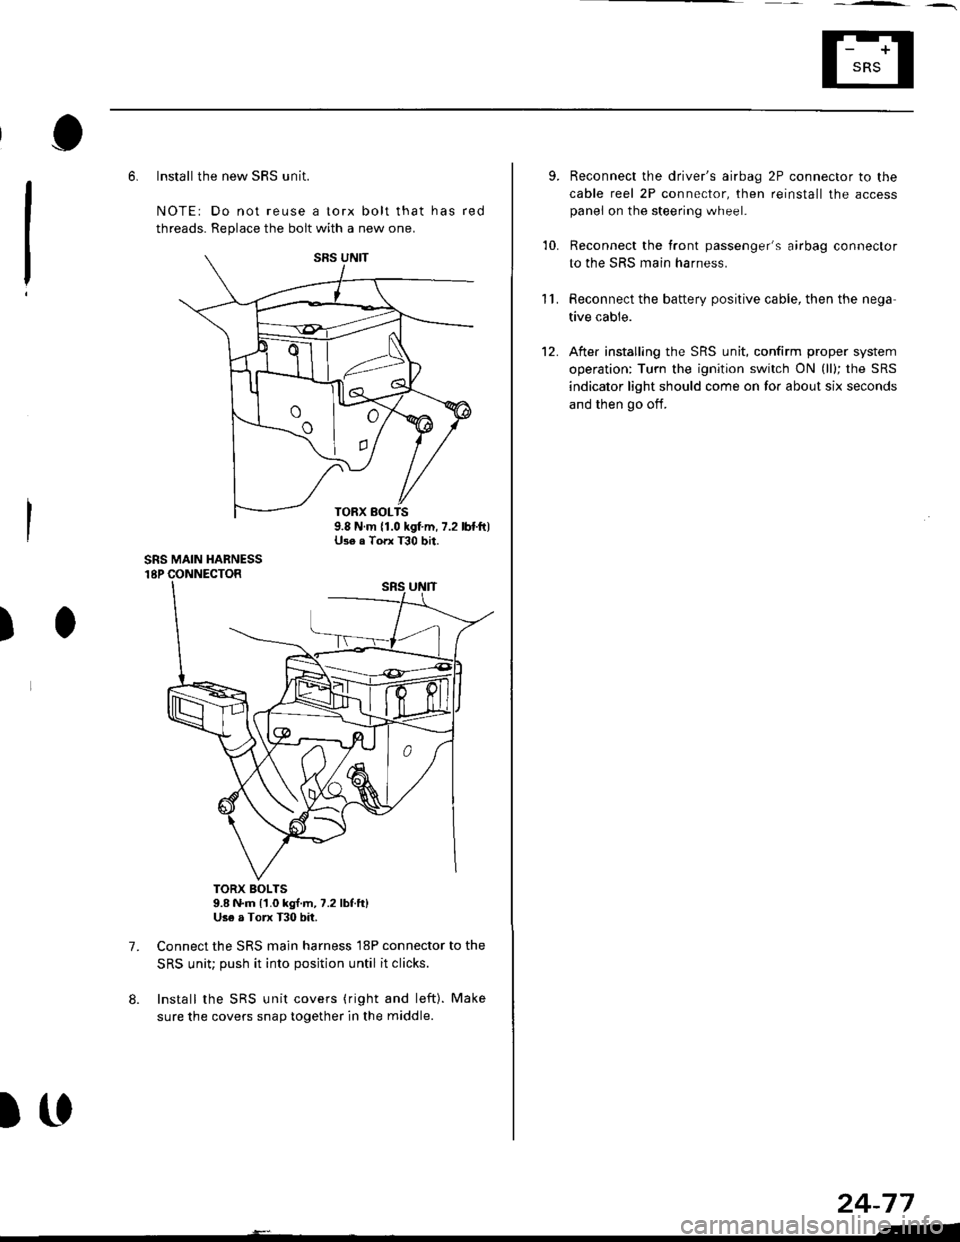 HONDA CIVIC 1997 6.G Repair Manual 6. Install the new SRS unit.
NOTE: Do not reuse a torx bolt that has red
threads. Replace the bolt with a new one.
)
7.
TORX BOLTS9.8 N.m l1.0 kg{.m, 7.2 lbf.ft}Use a Torx T30 bit.
Connect the SRS ma